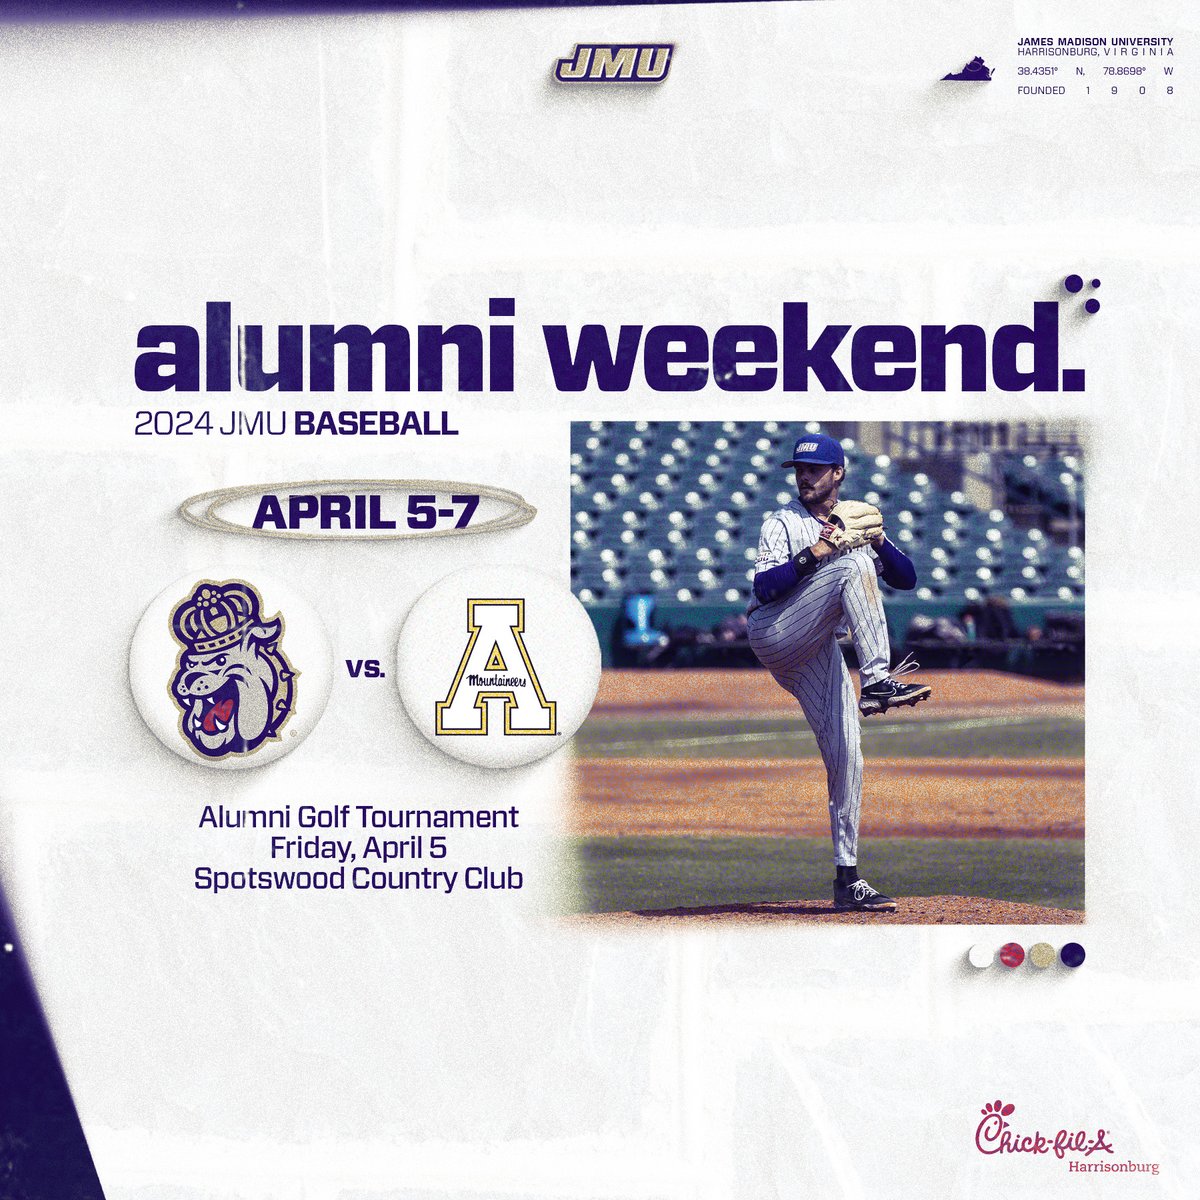 Calling all alumni, plan your return to Harrisonburg for the weekend of April 5-7 and make sure you sign up for the alumni golf tournament on April 5! ⛳️ | bit.ly/3UVgNaL #GoDukes